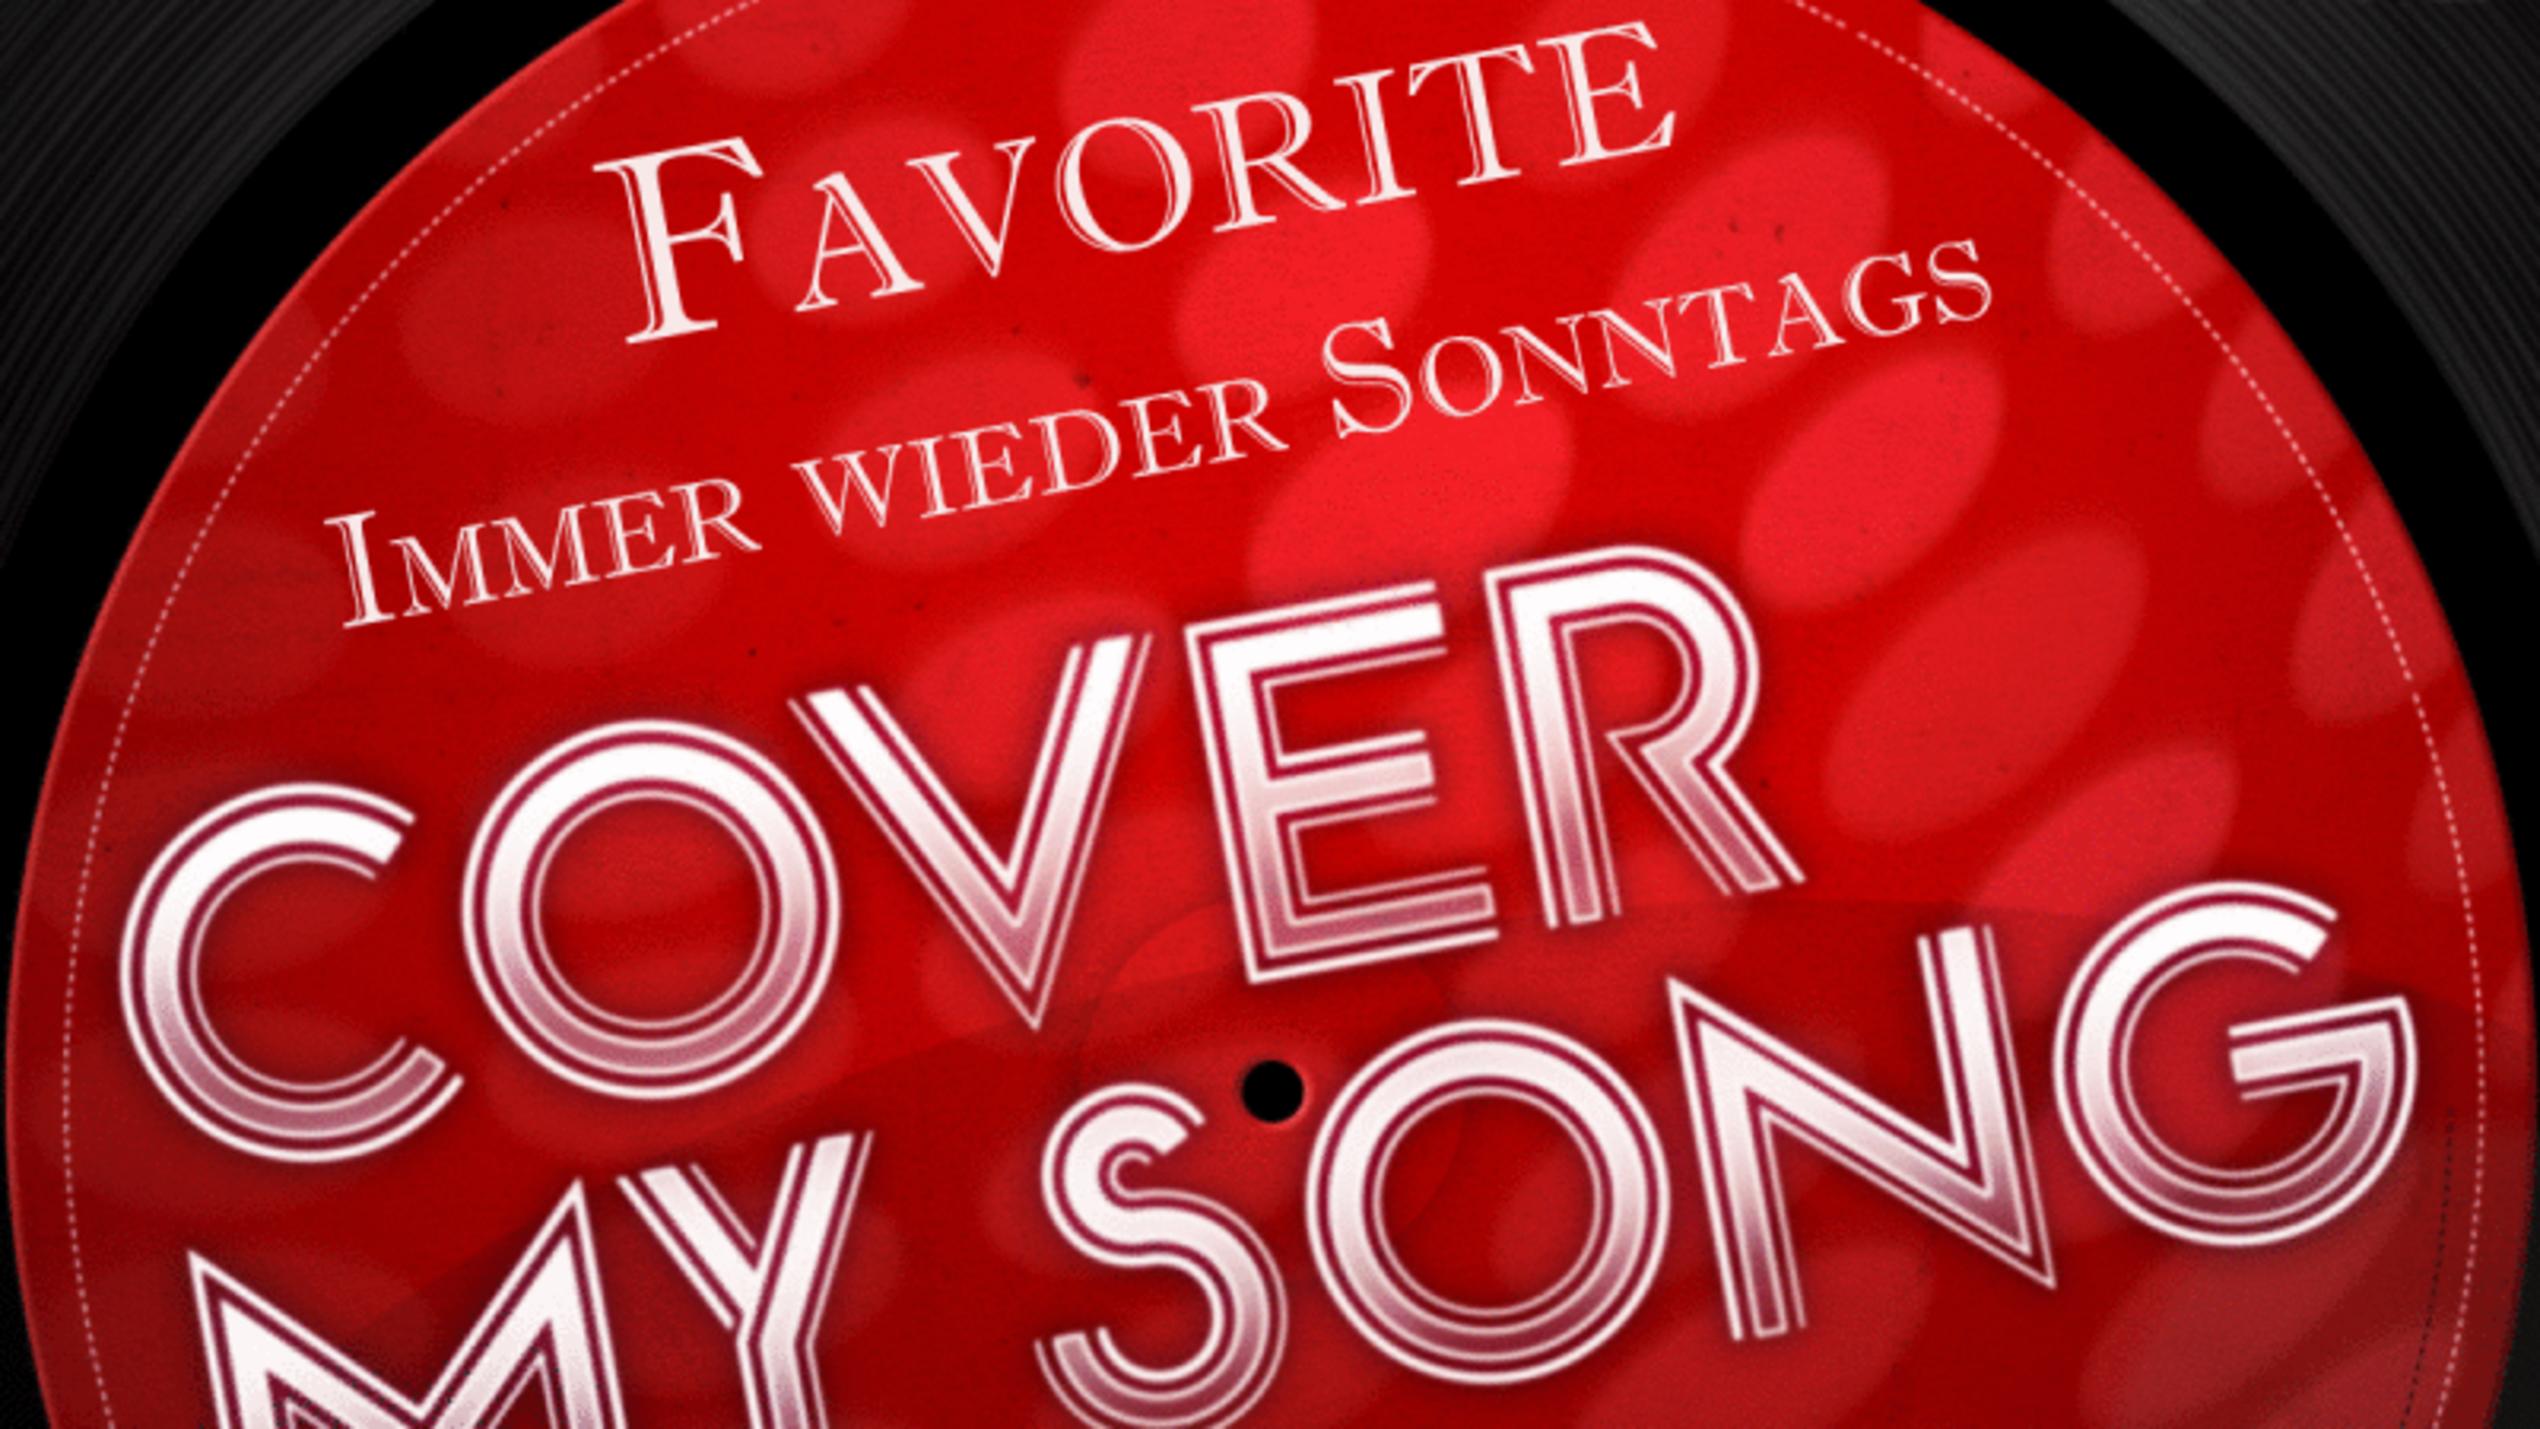 Favorites Cover-Song Immer wieder sonntags